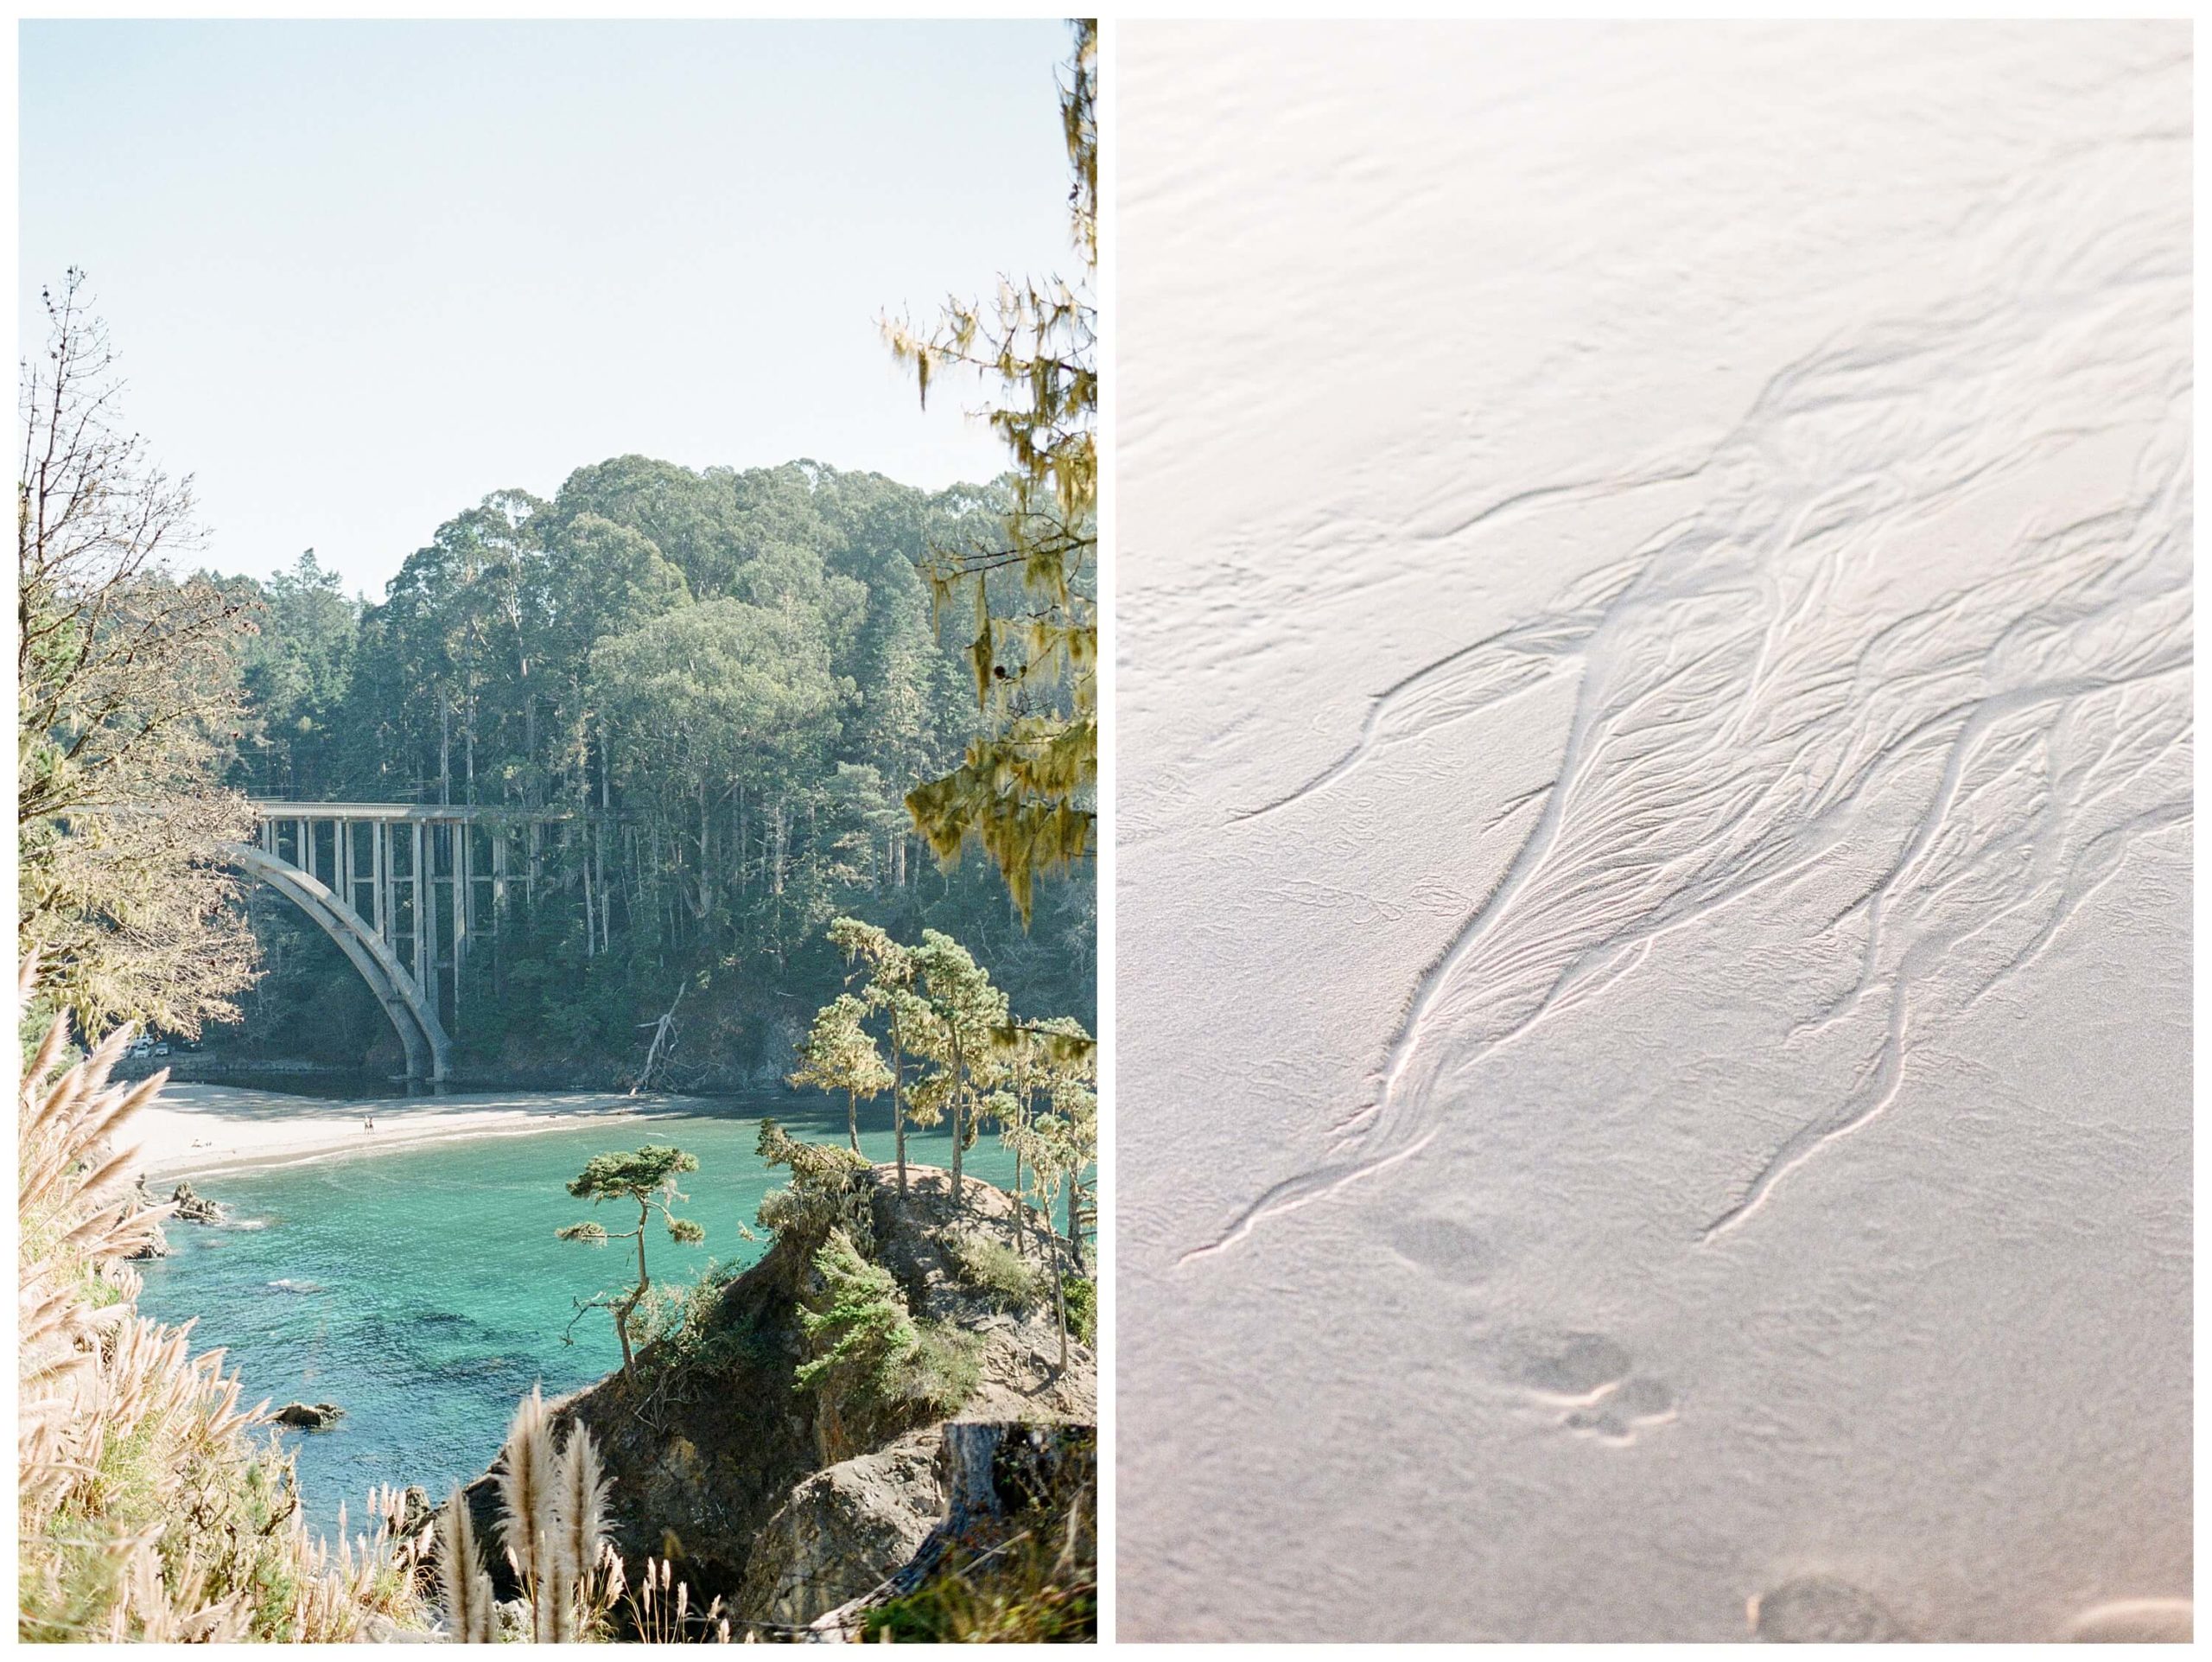 Left: A view of Russian Gulch between the trees, with its turquoise waters that meet the bridge that carries cars over the gulch. Right: Tracks in the sand left by the seaweed, pulled by the waves into the ocean.